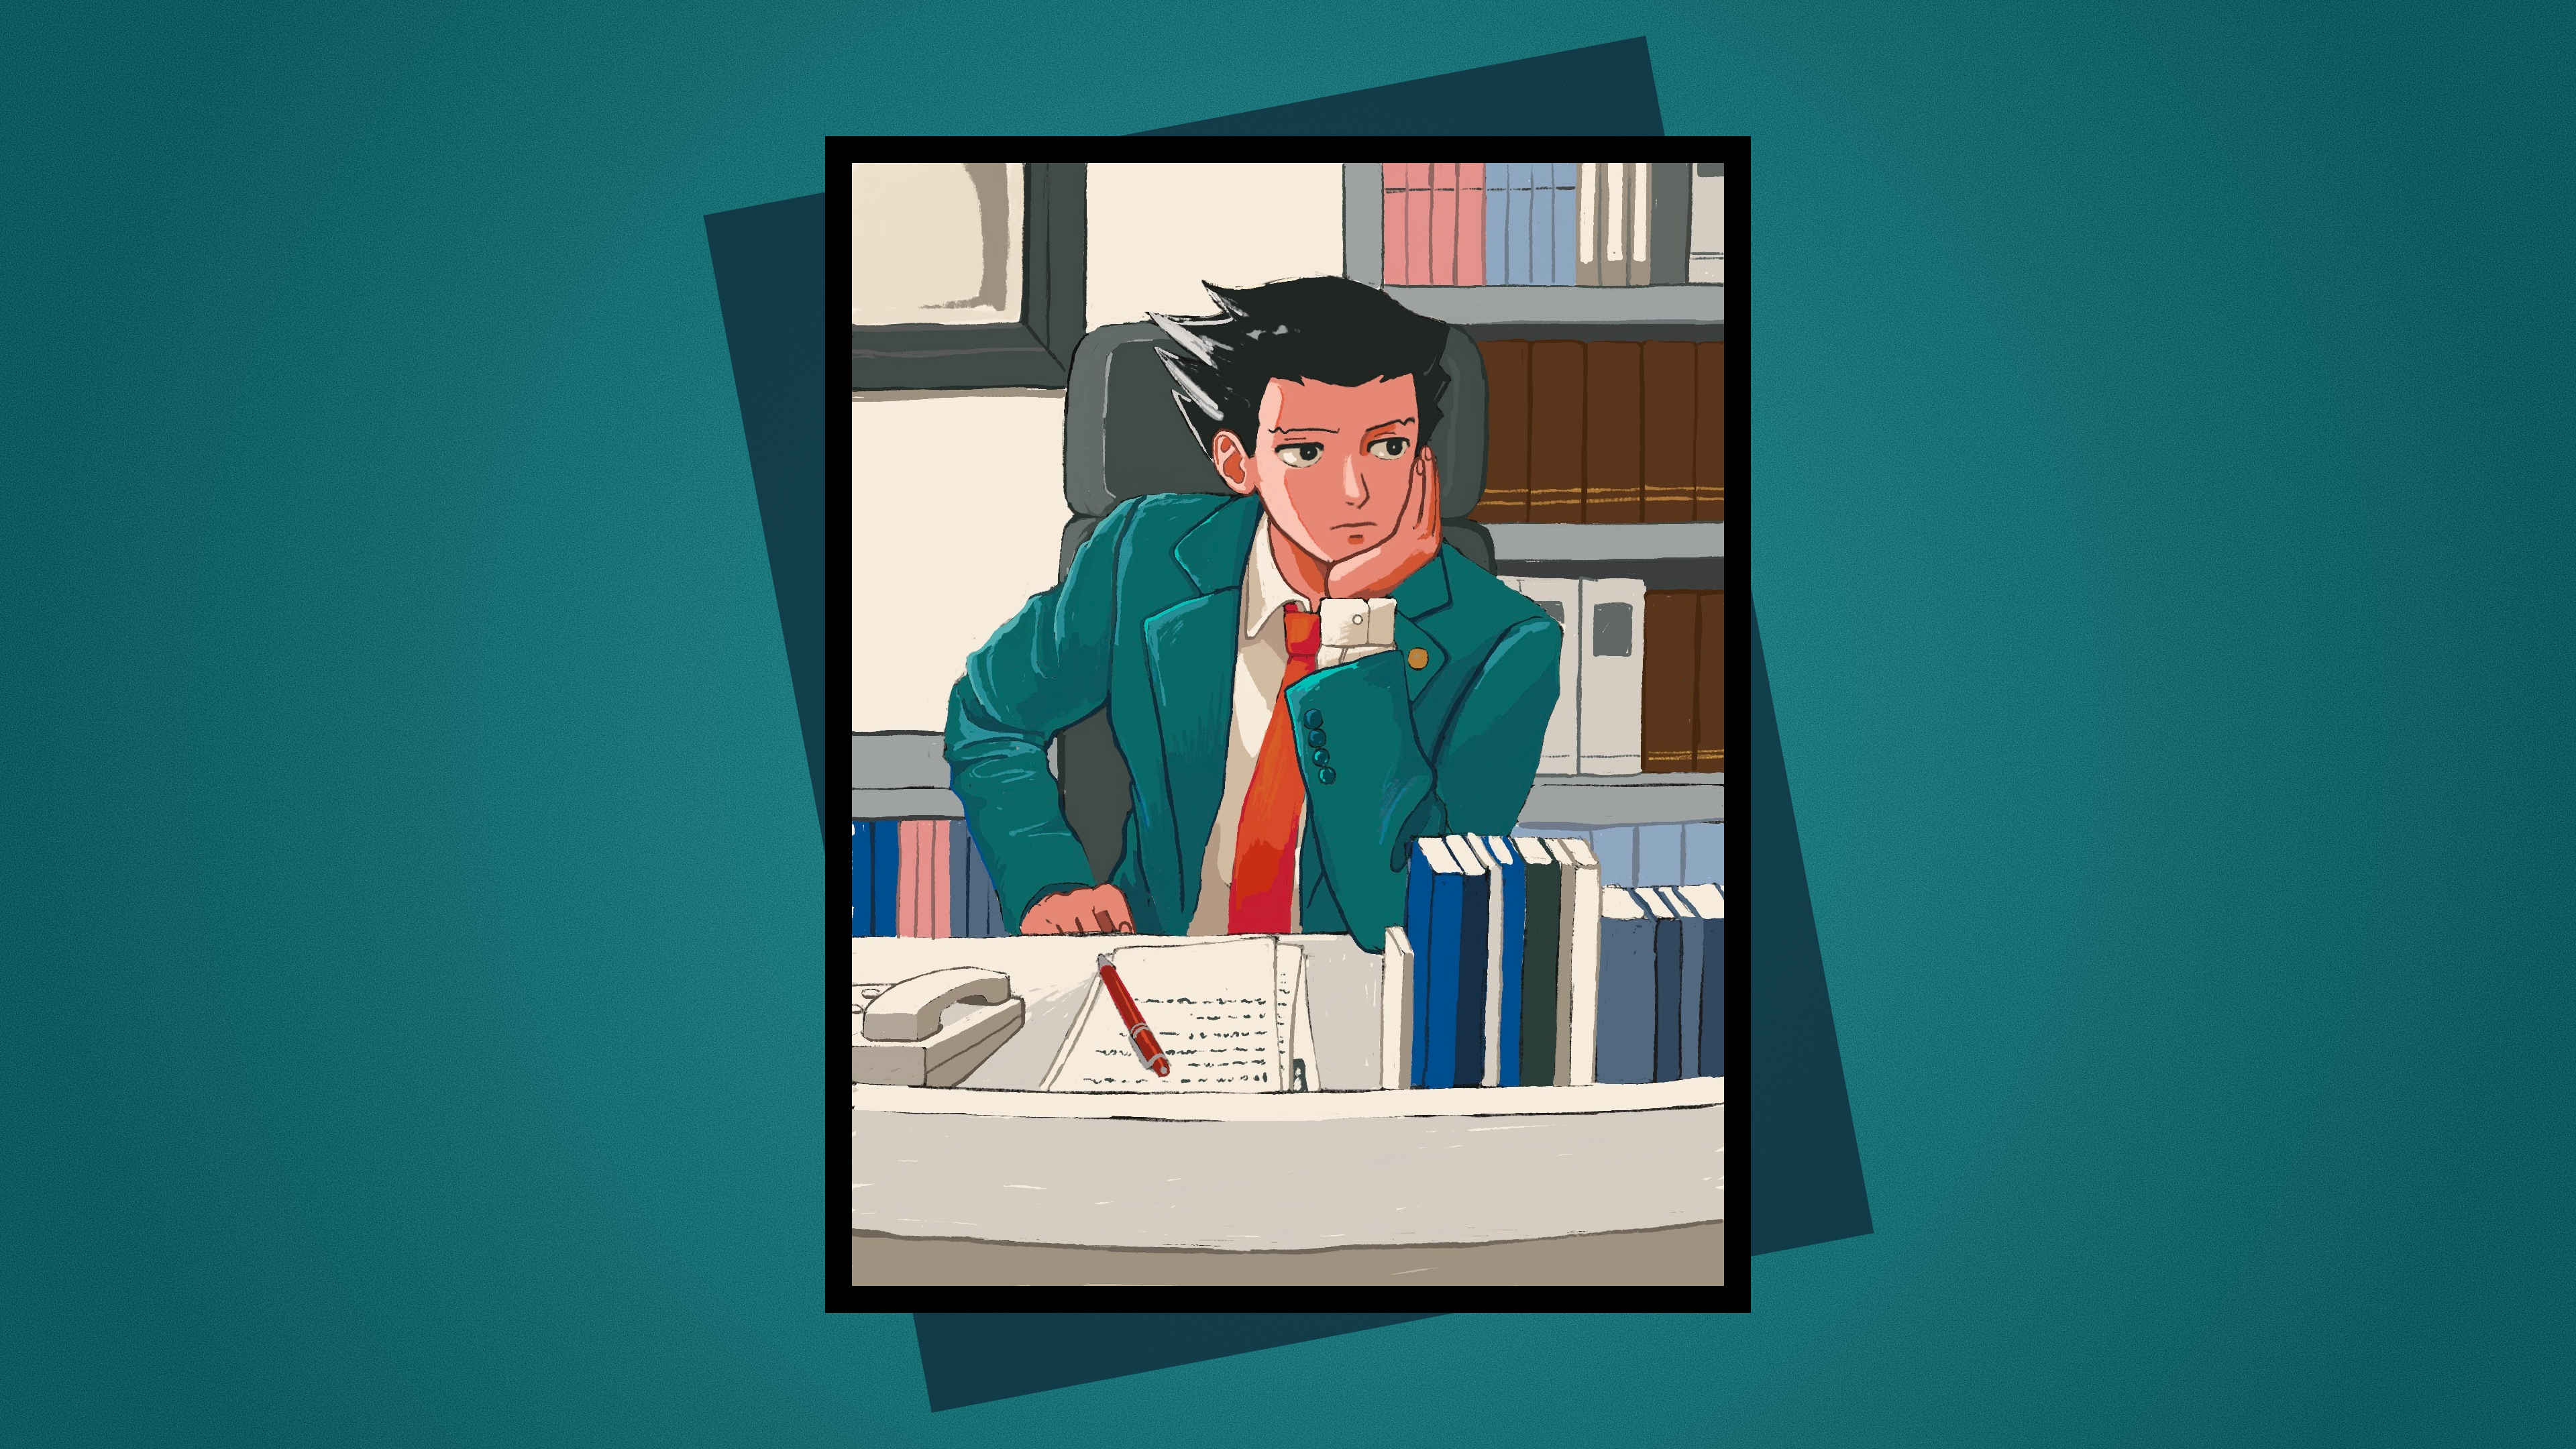 Anime 3840x2160 ace attorney Spiky Hair phoenix wright suits tie red tie blue jacket white shirt simple background looking sideways black hair dark hair Capcom video games paper books anime boys phone pens pencils office office chair office furniture frame